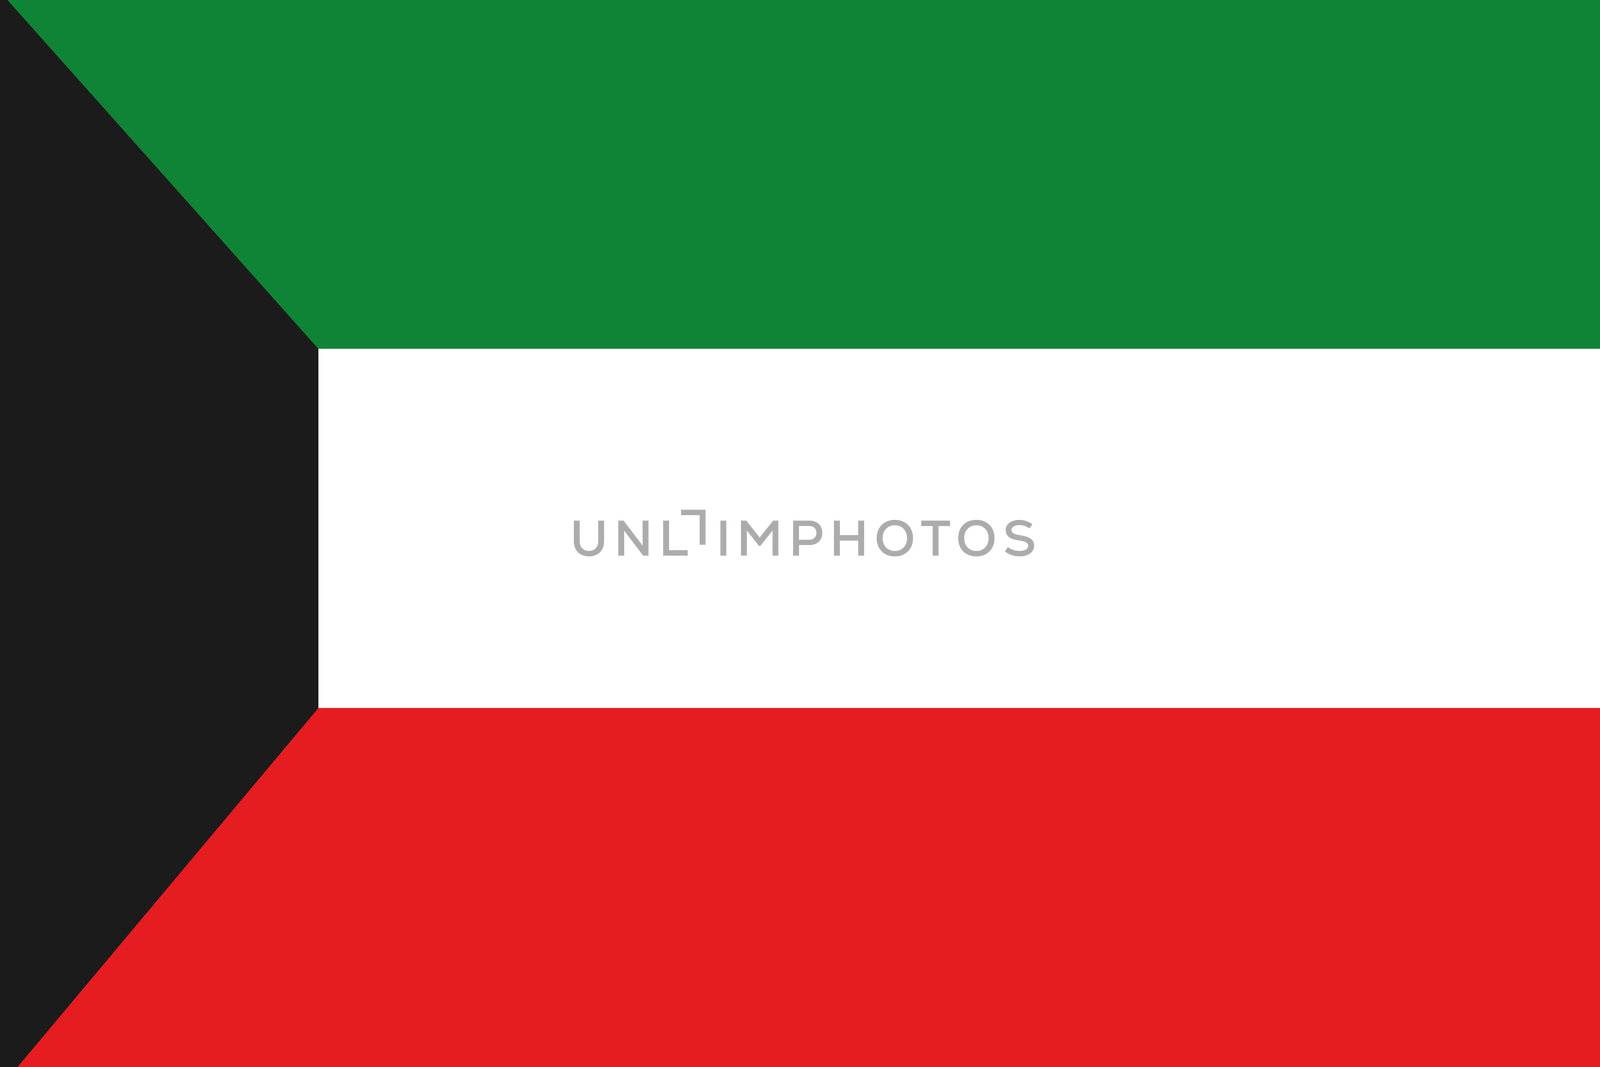 An illustration of the flag of Kuwait